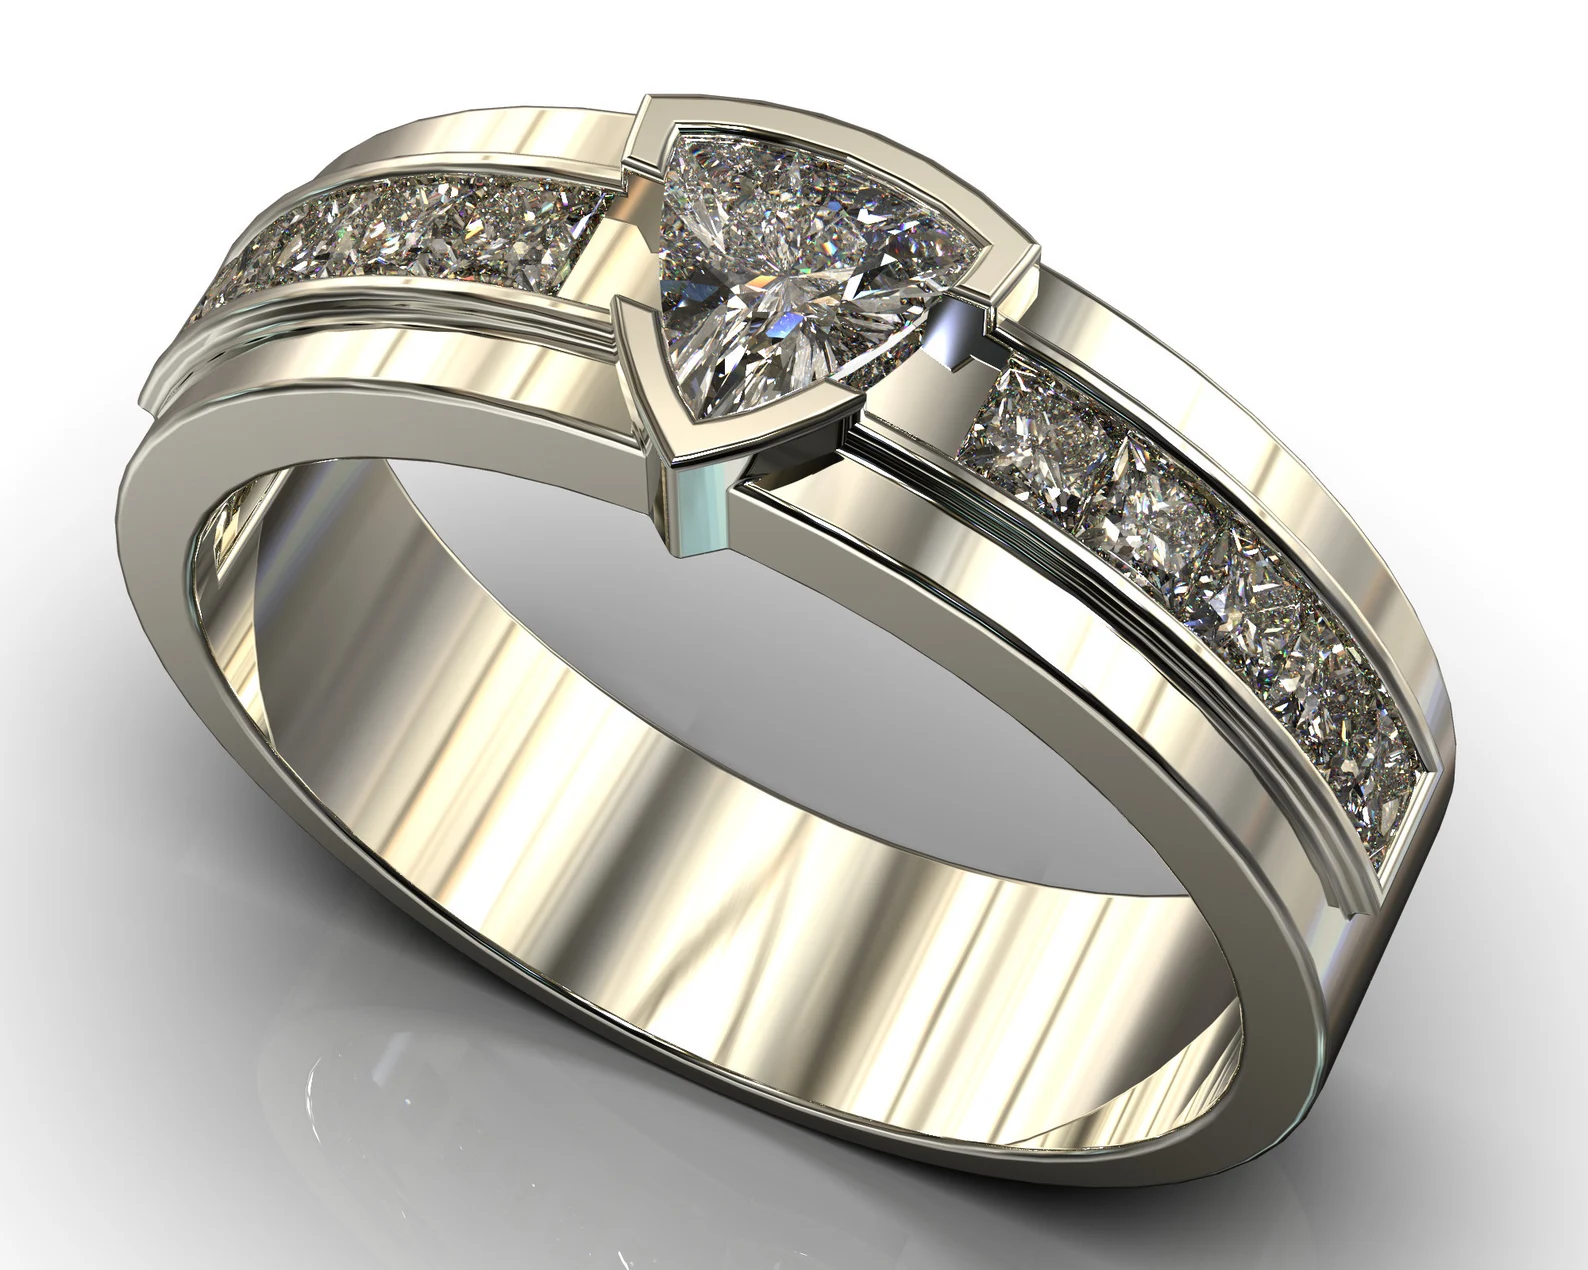 Mens Diamond Ring In Surat - Prices, Manufacturers & Suppliers-baongoctrading.com.vn